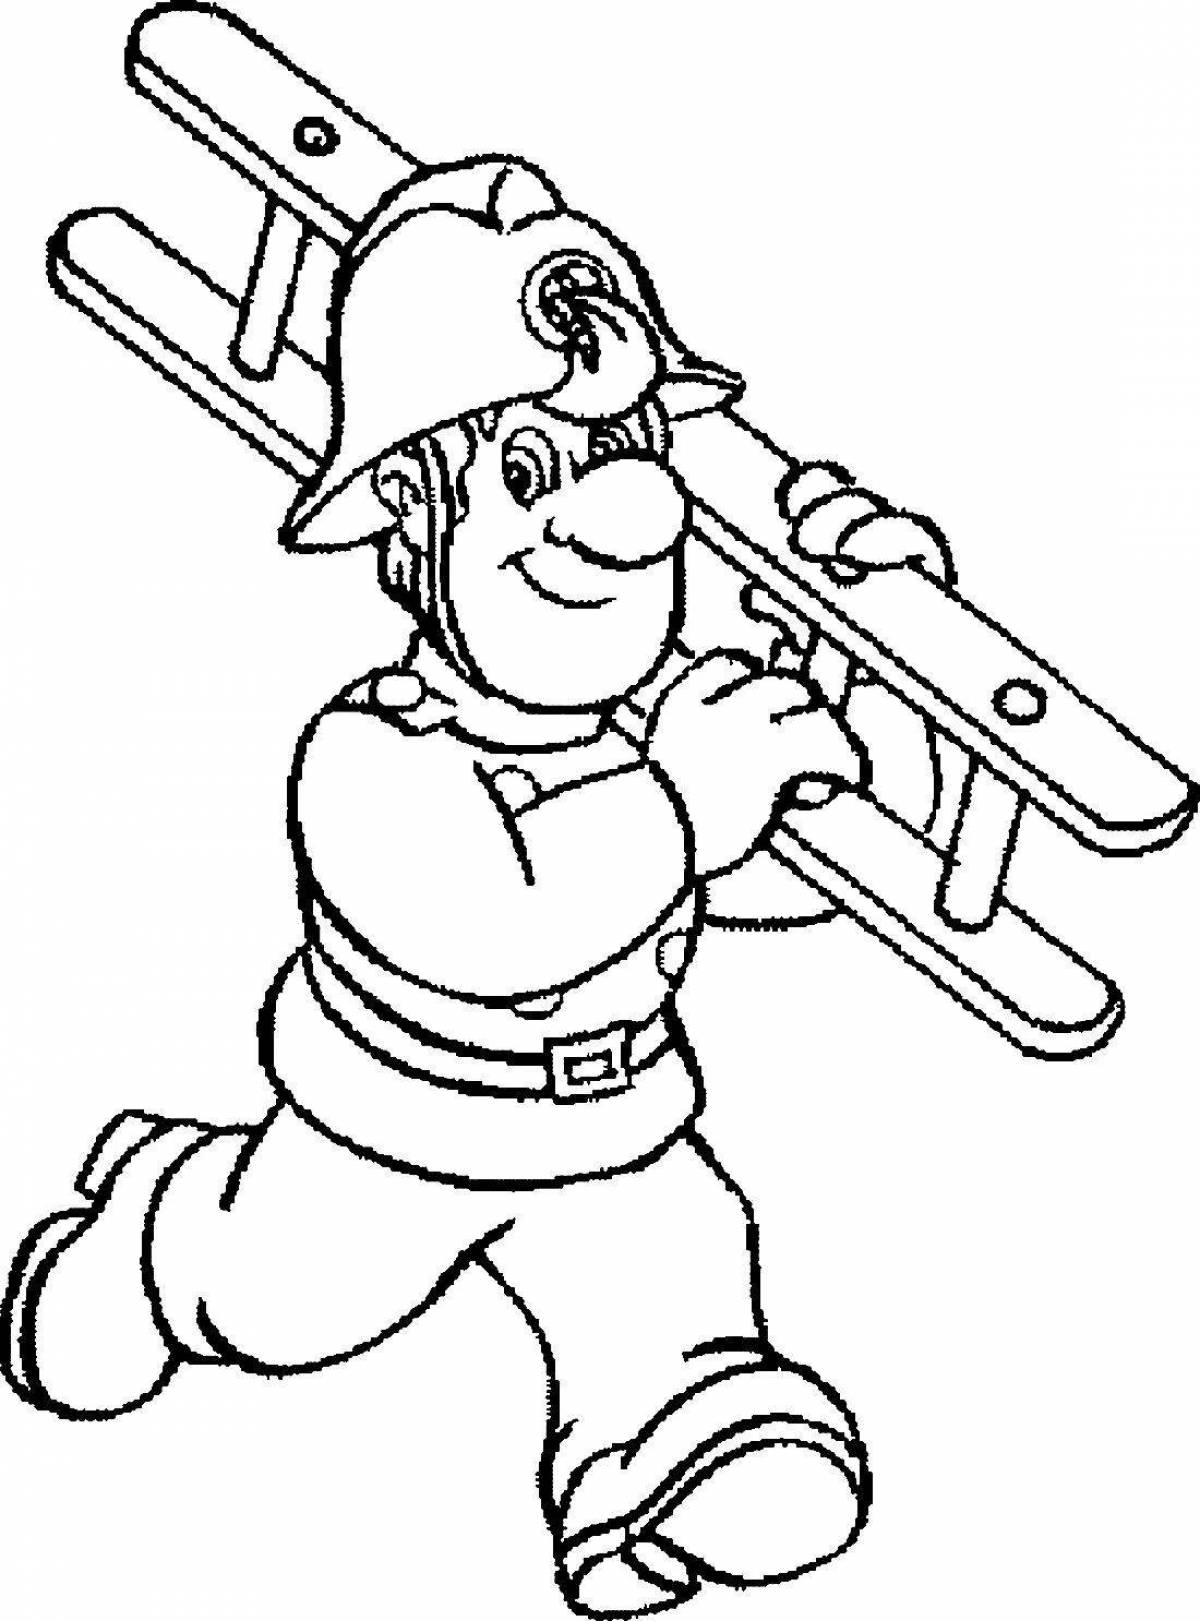 Playful fireman coloring page for kids